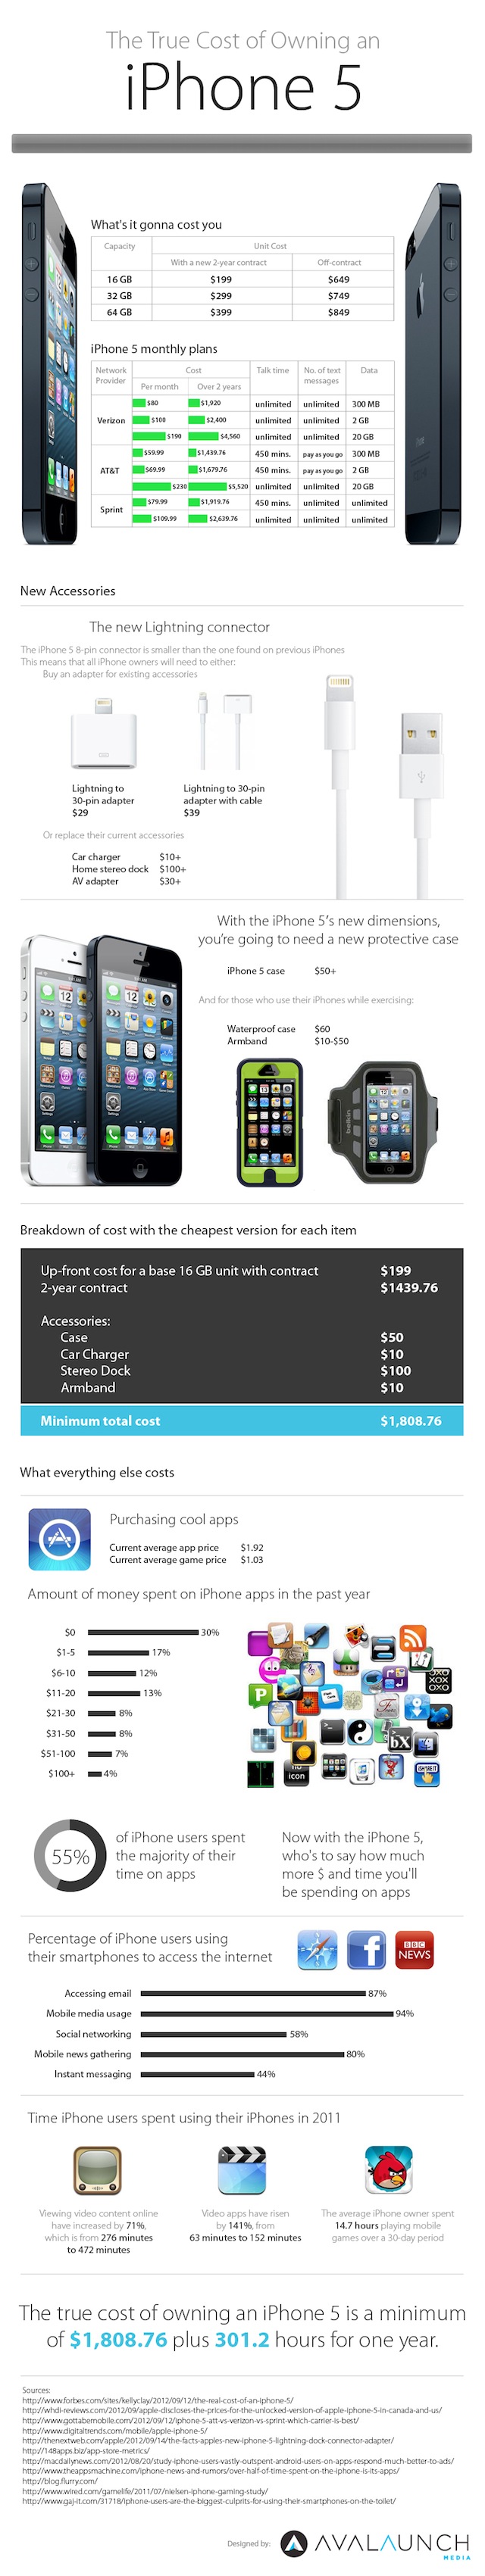 Infographic: The True Cost of Owning an iPhone 5